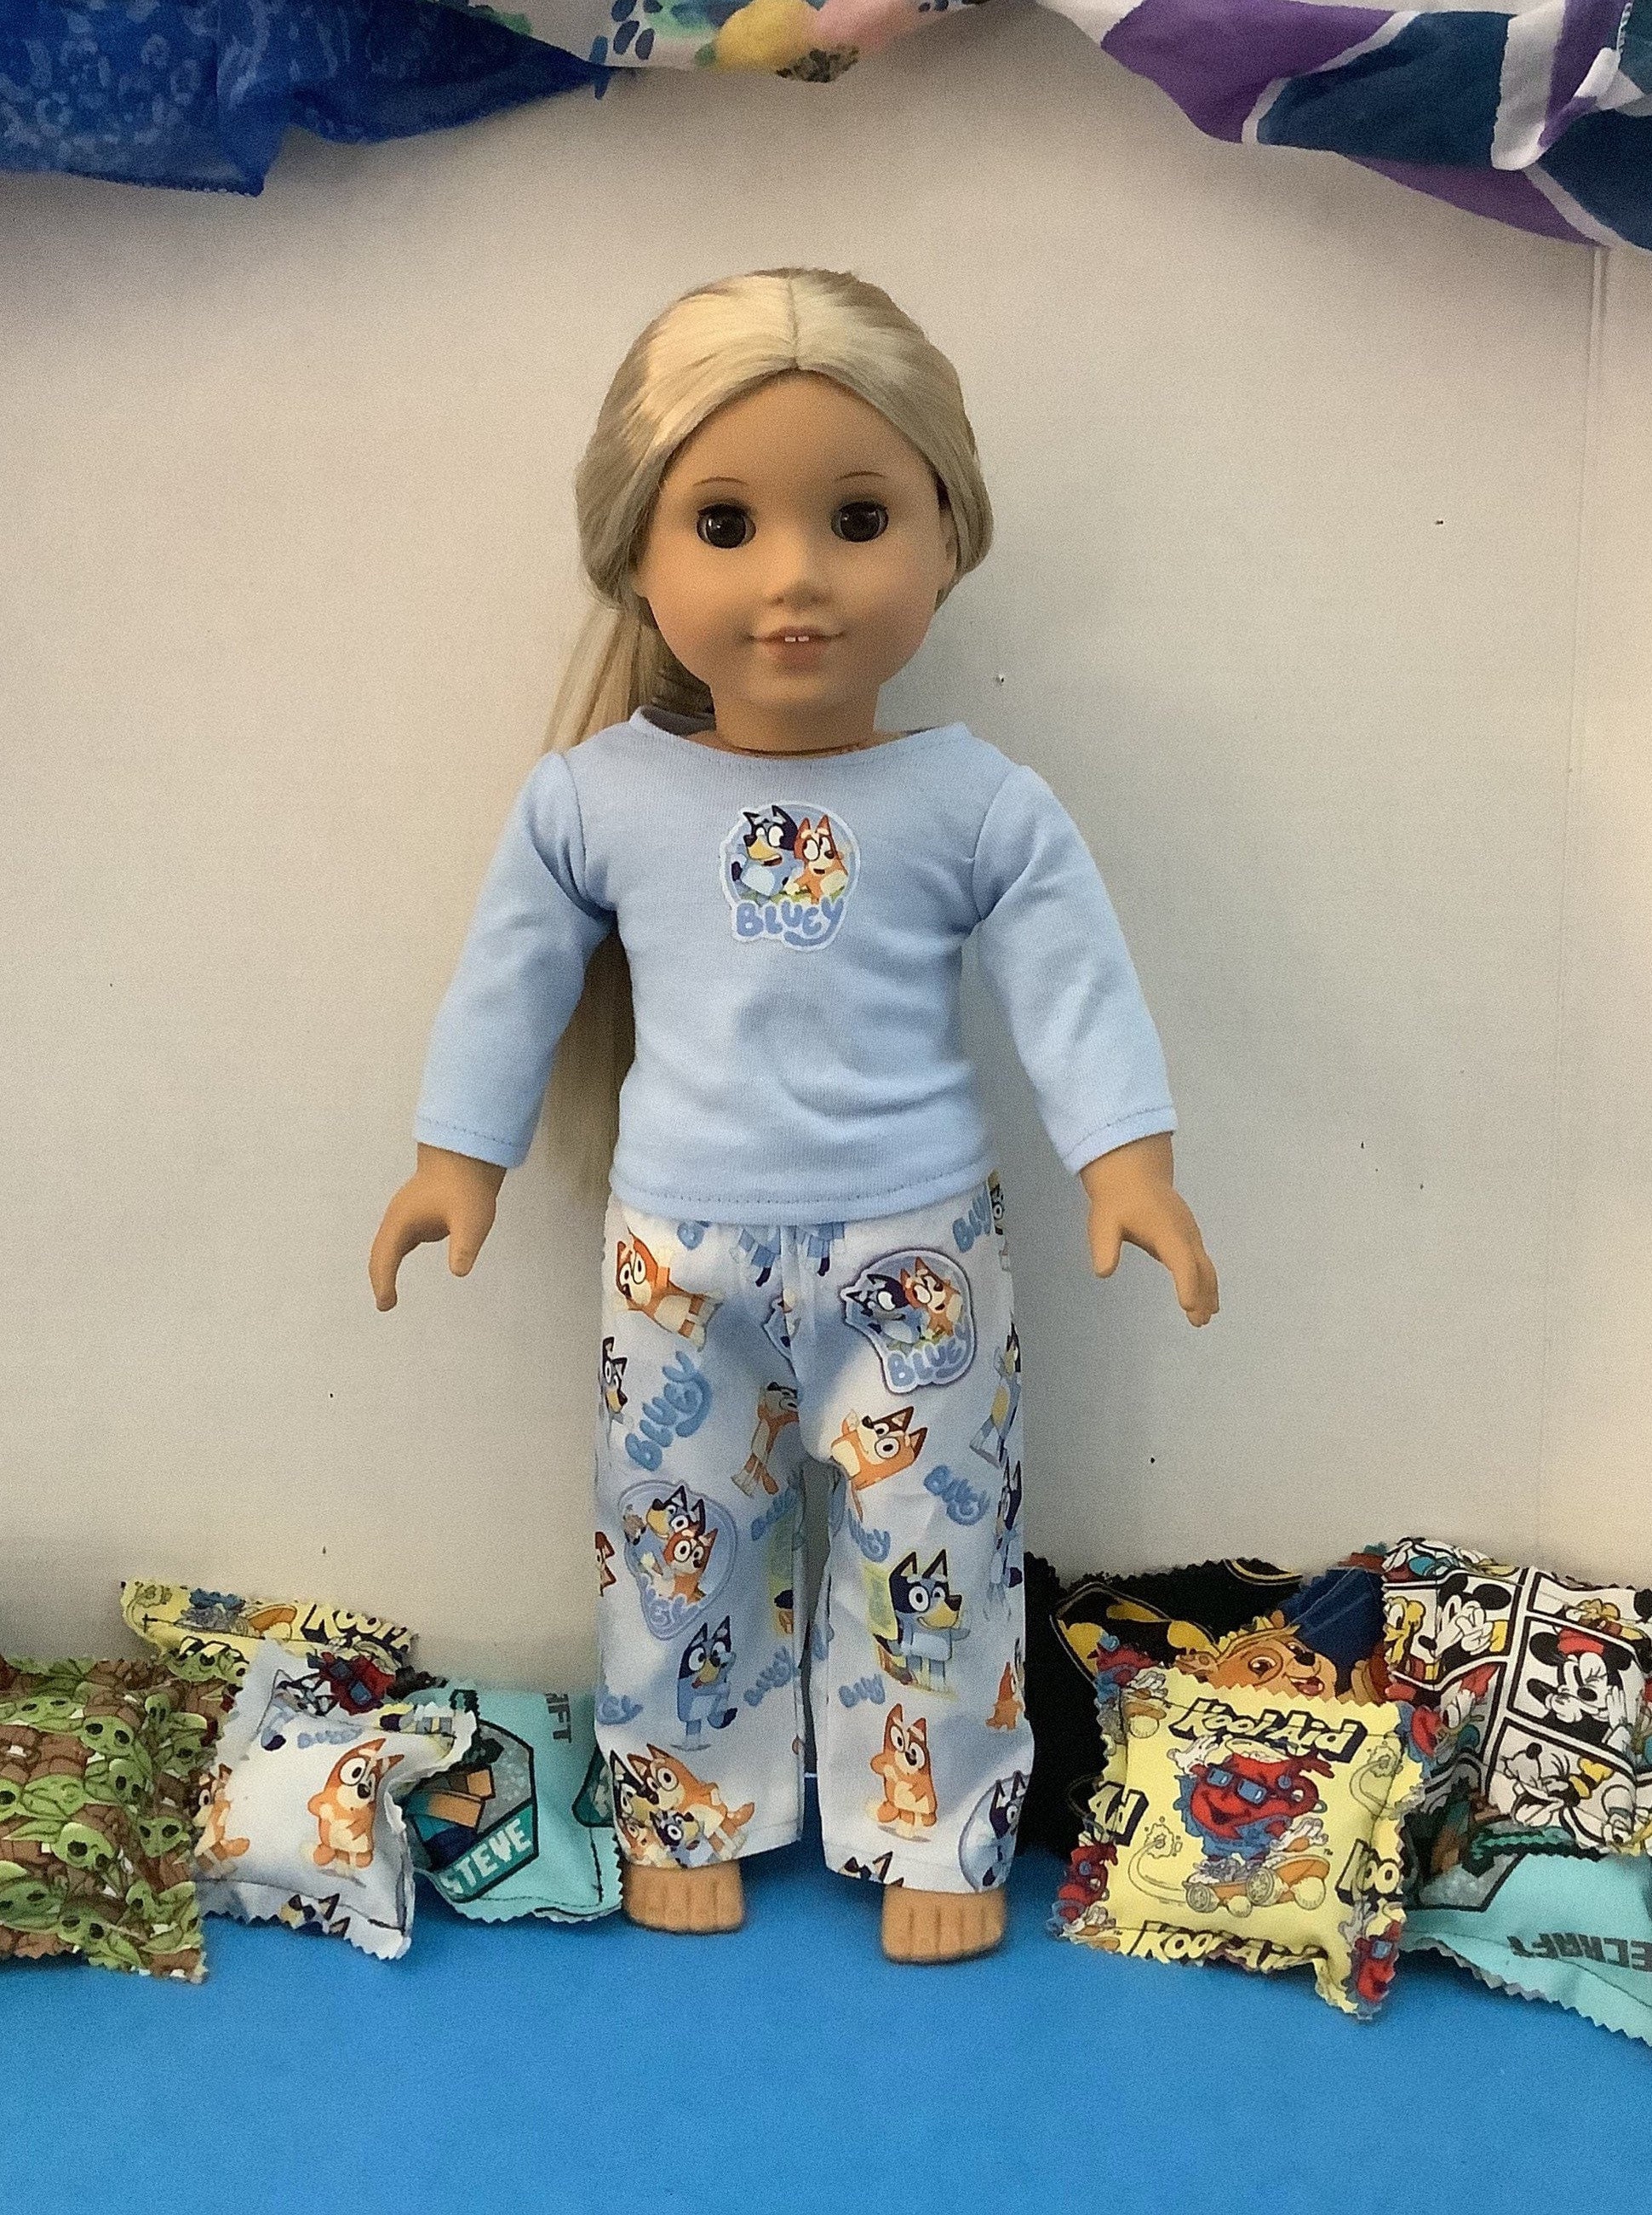 Dongzhur 18 Inch Doll Clothes Pajamas Suit Doll Pajamas Children For DIY  18 Doll Clothes And Accessories WWP7064